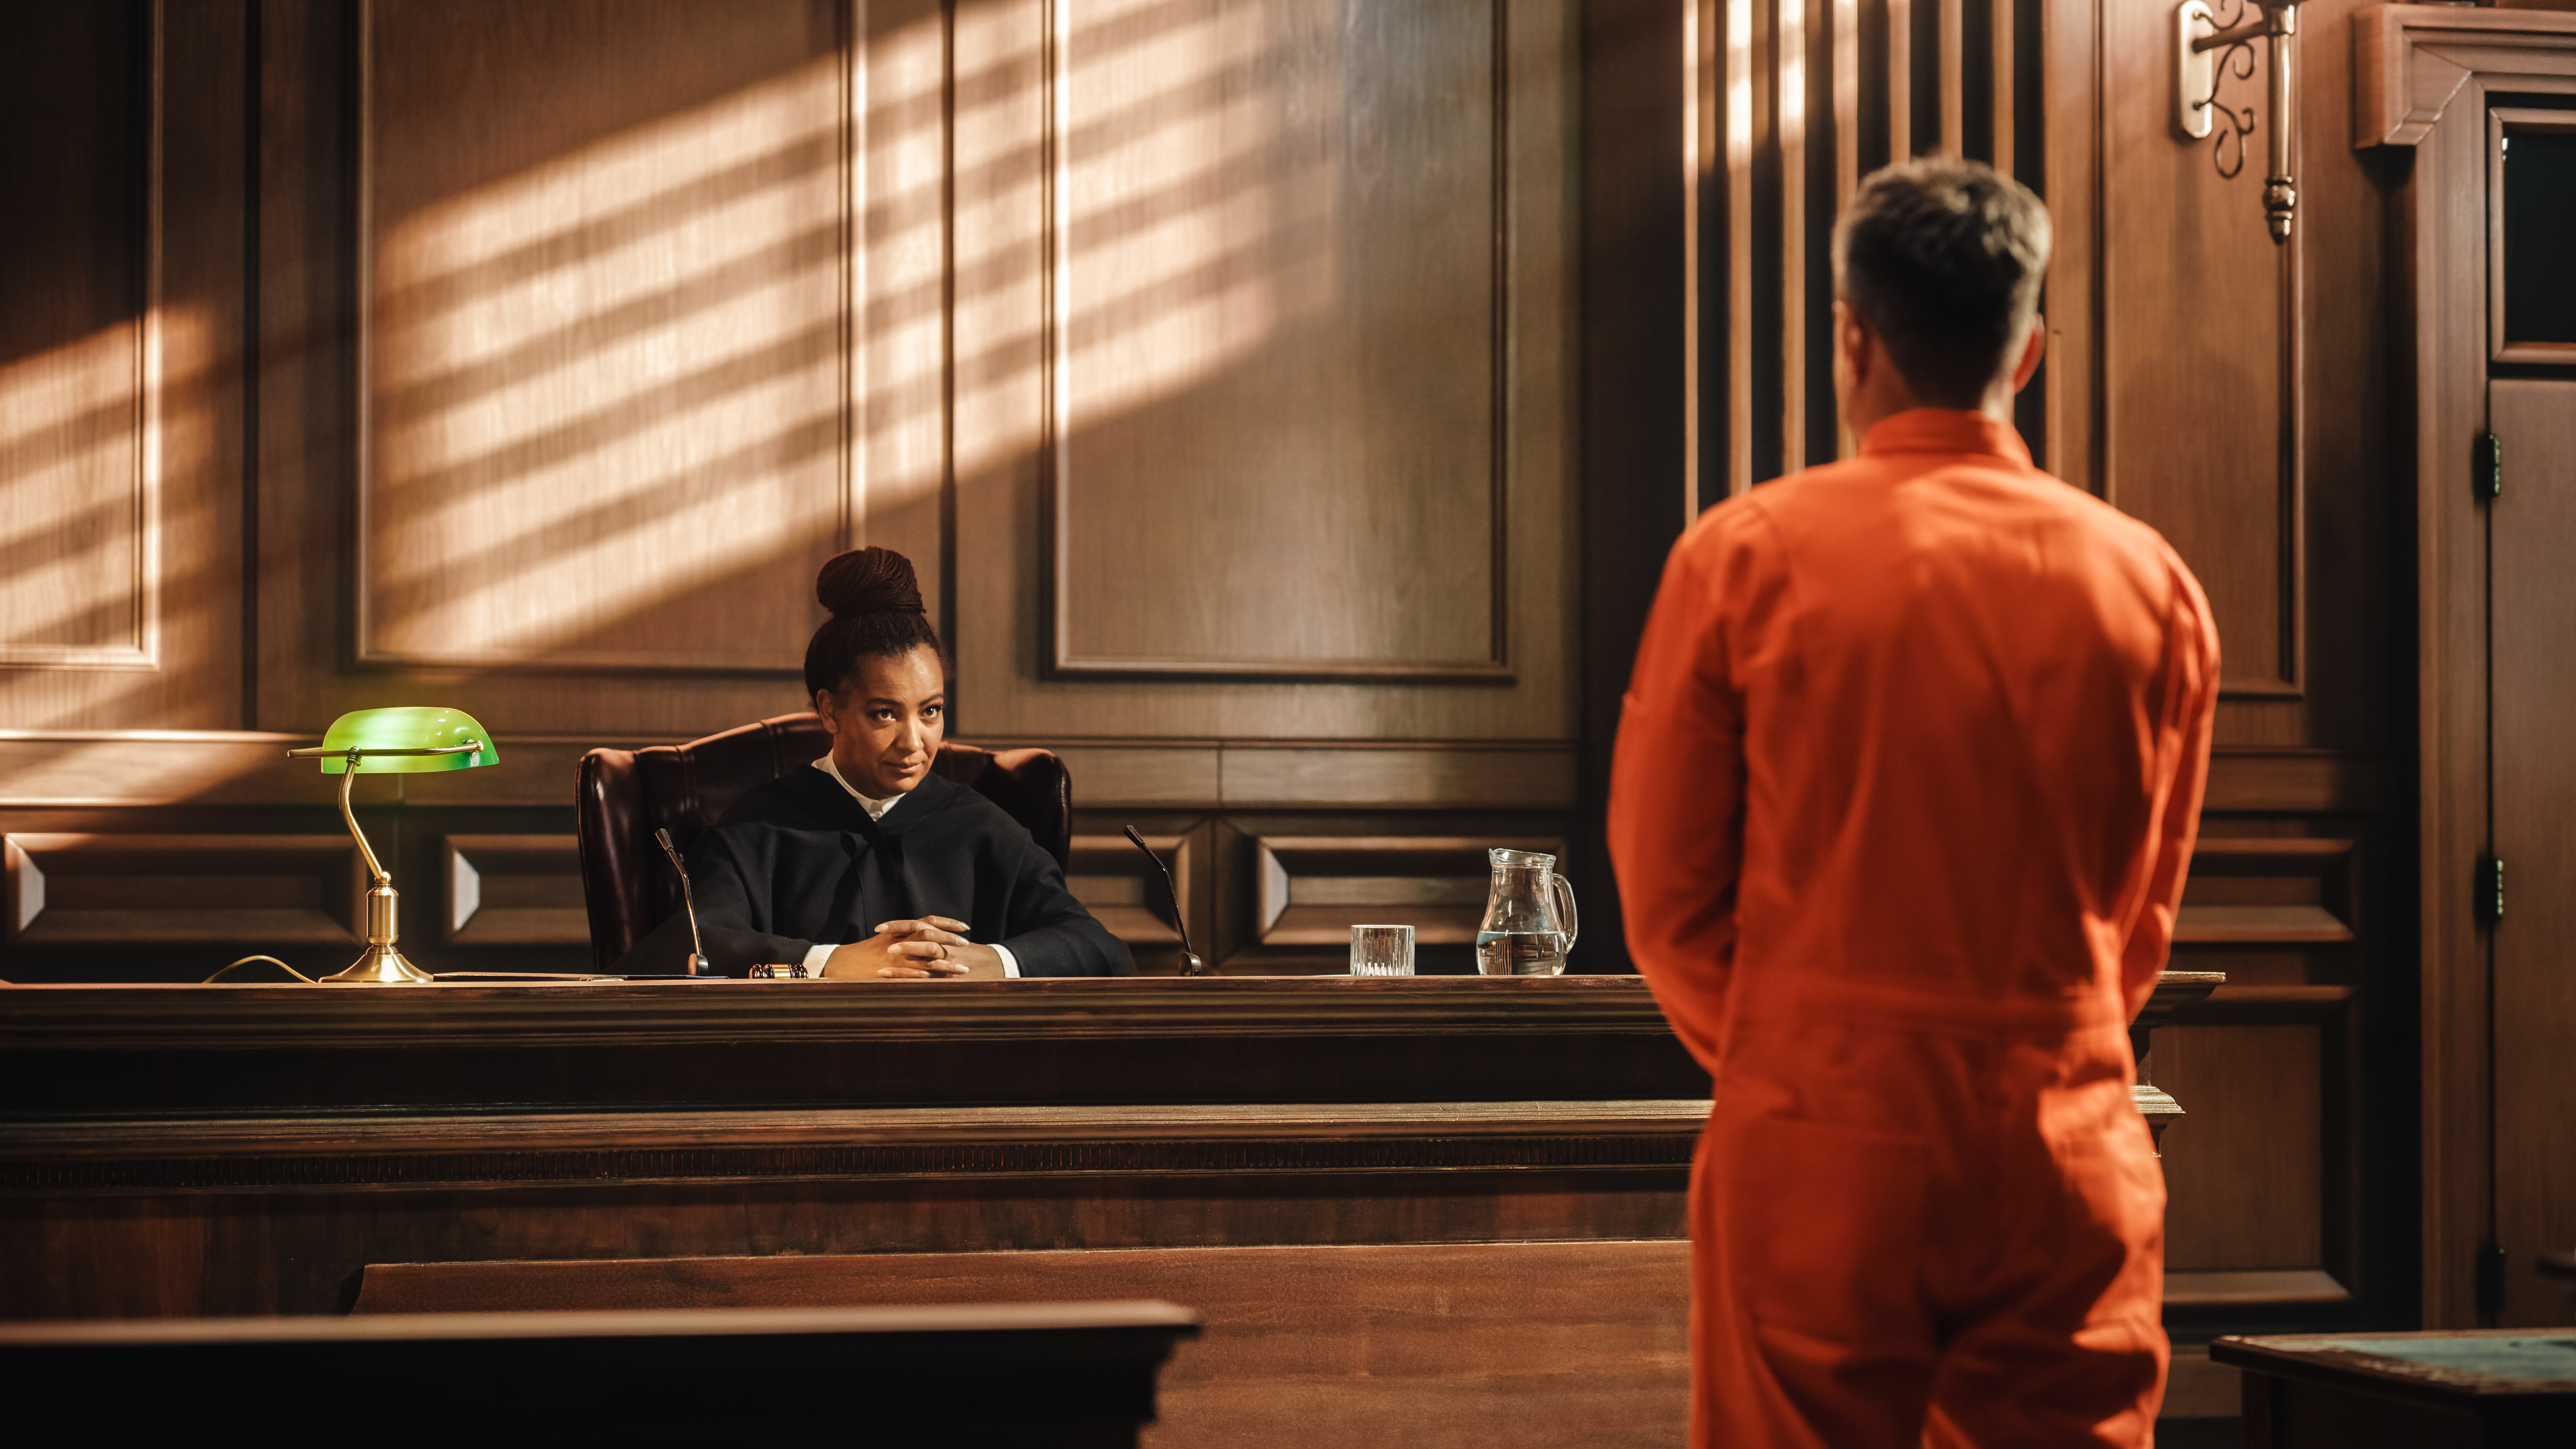 An individual in court receiving parole after serving a portion of their sentence - contact Branson West Law for help understanding parole and probation!